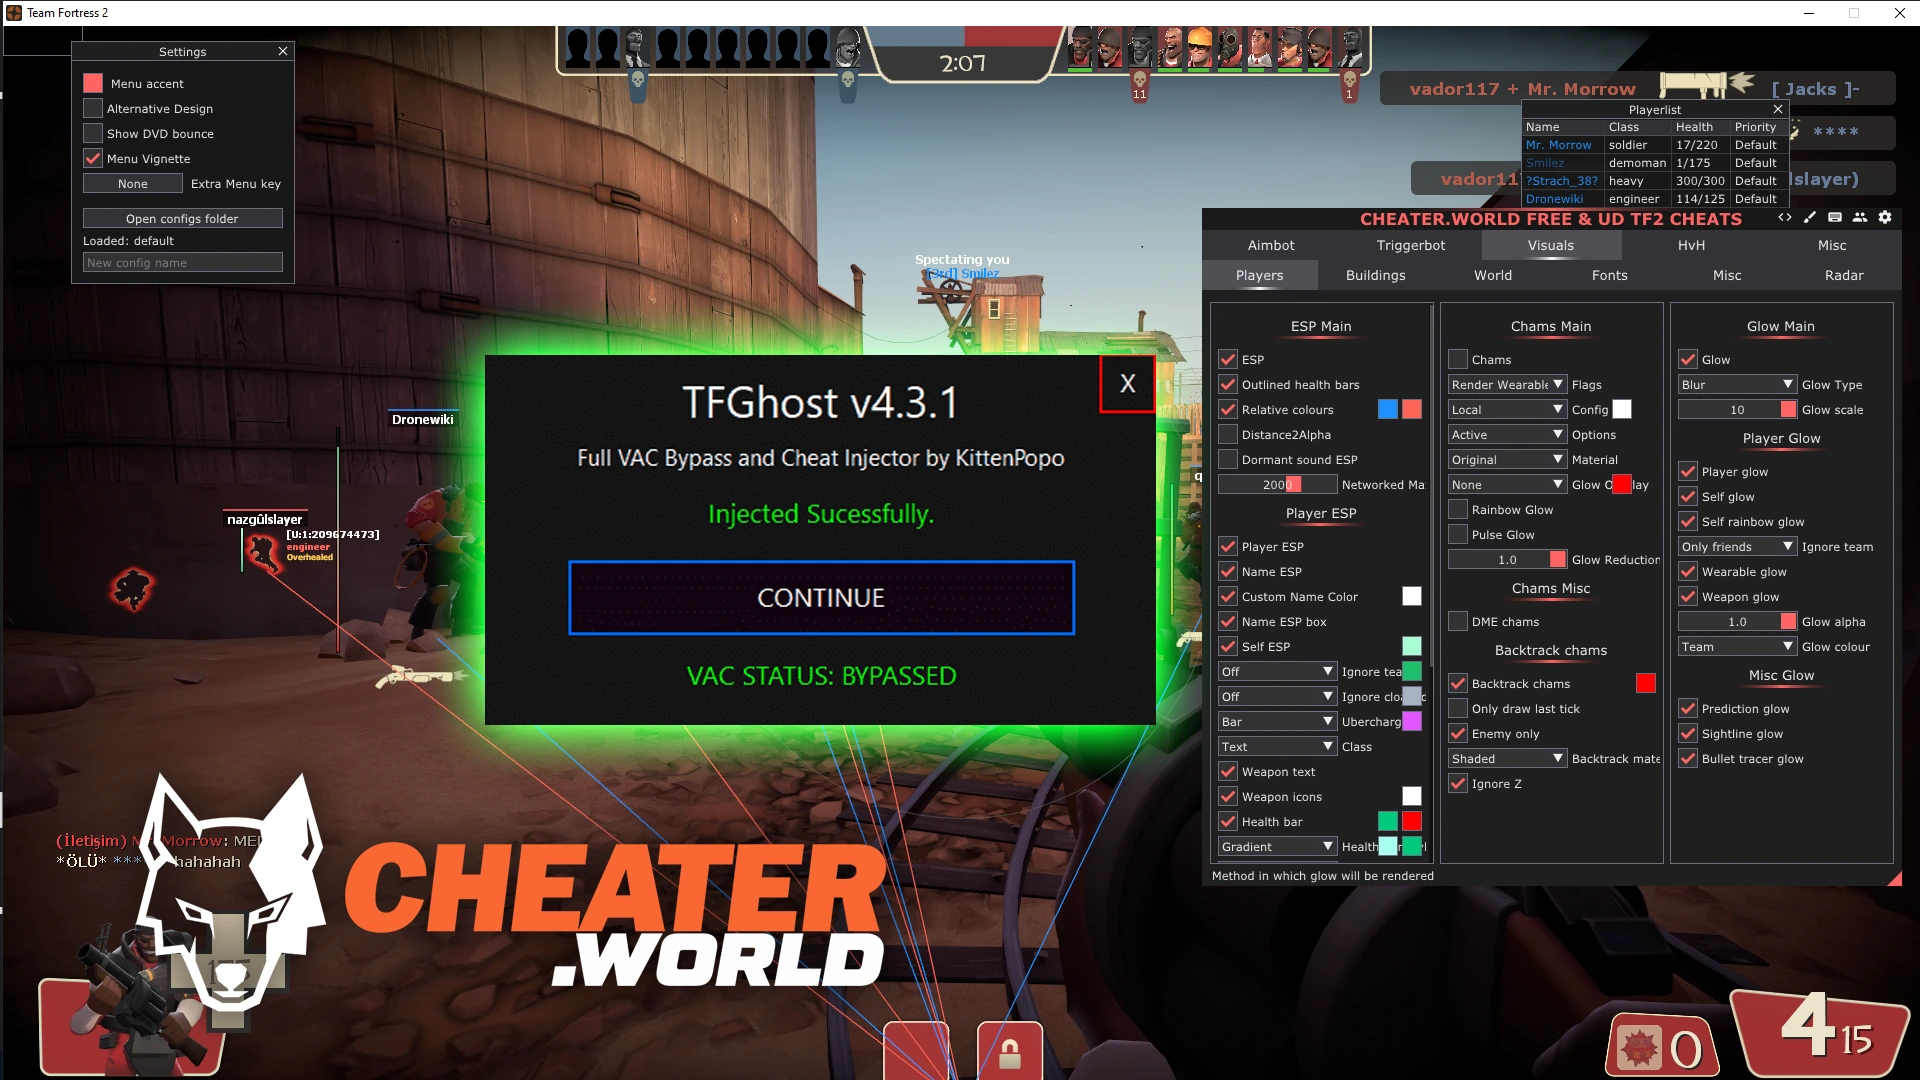 TFGhost Injector - Free Team Fortress 2 injector and VAC Bypass 2